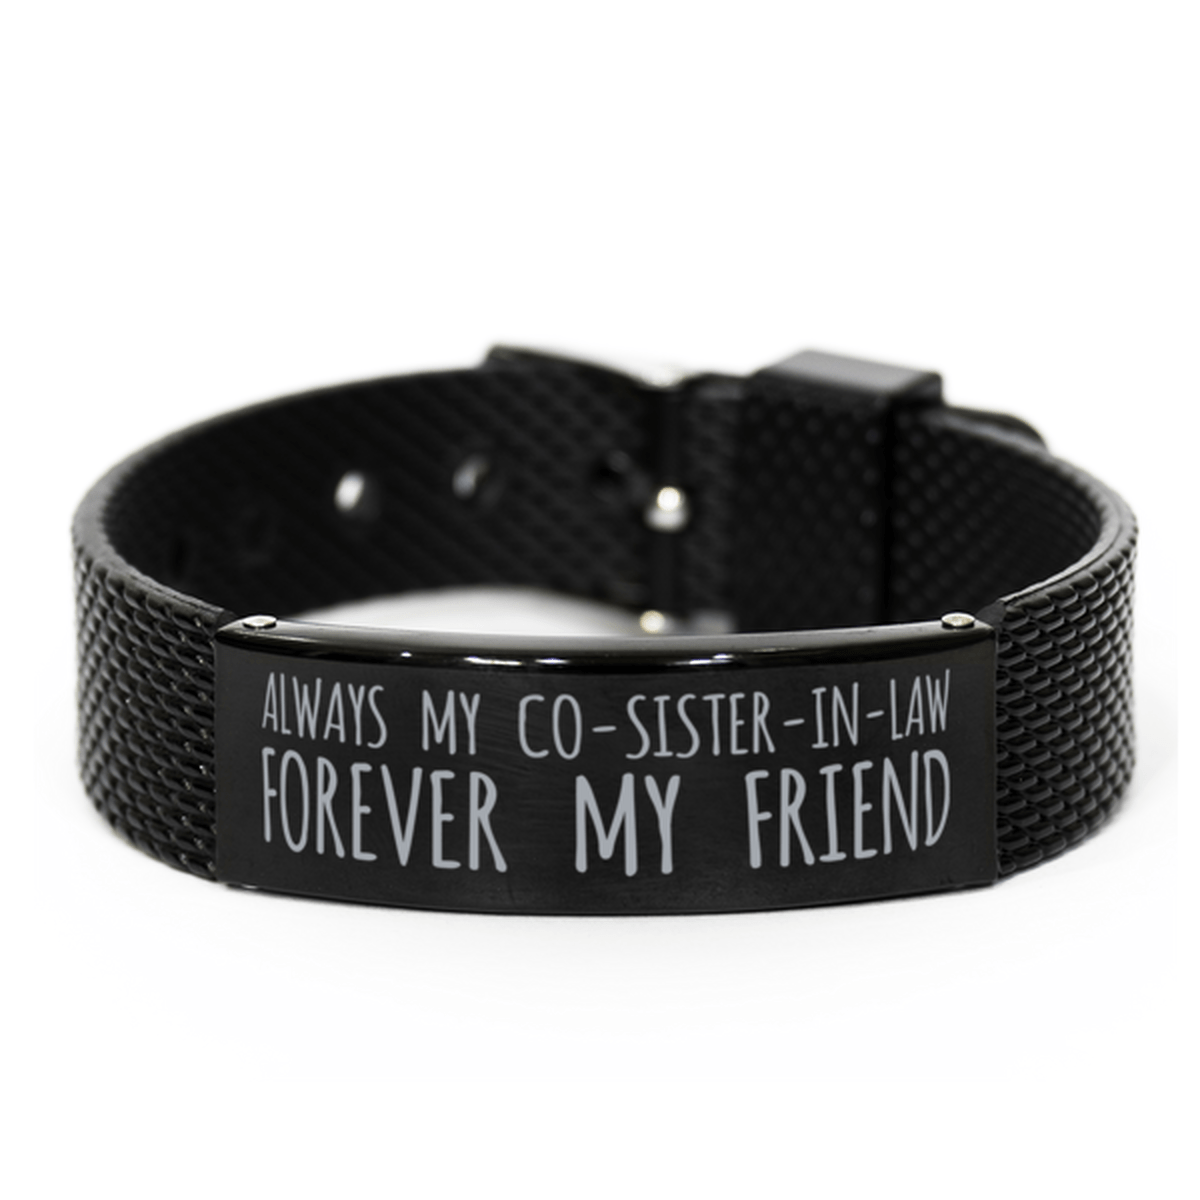 Inspirational Co-Sister-In-Law Black Shark Mesh Bracelet, Always My Co-Sister-In-Law Forever My Friend, Best Birthday Gifts for Family Friends